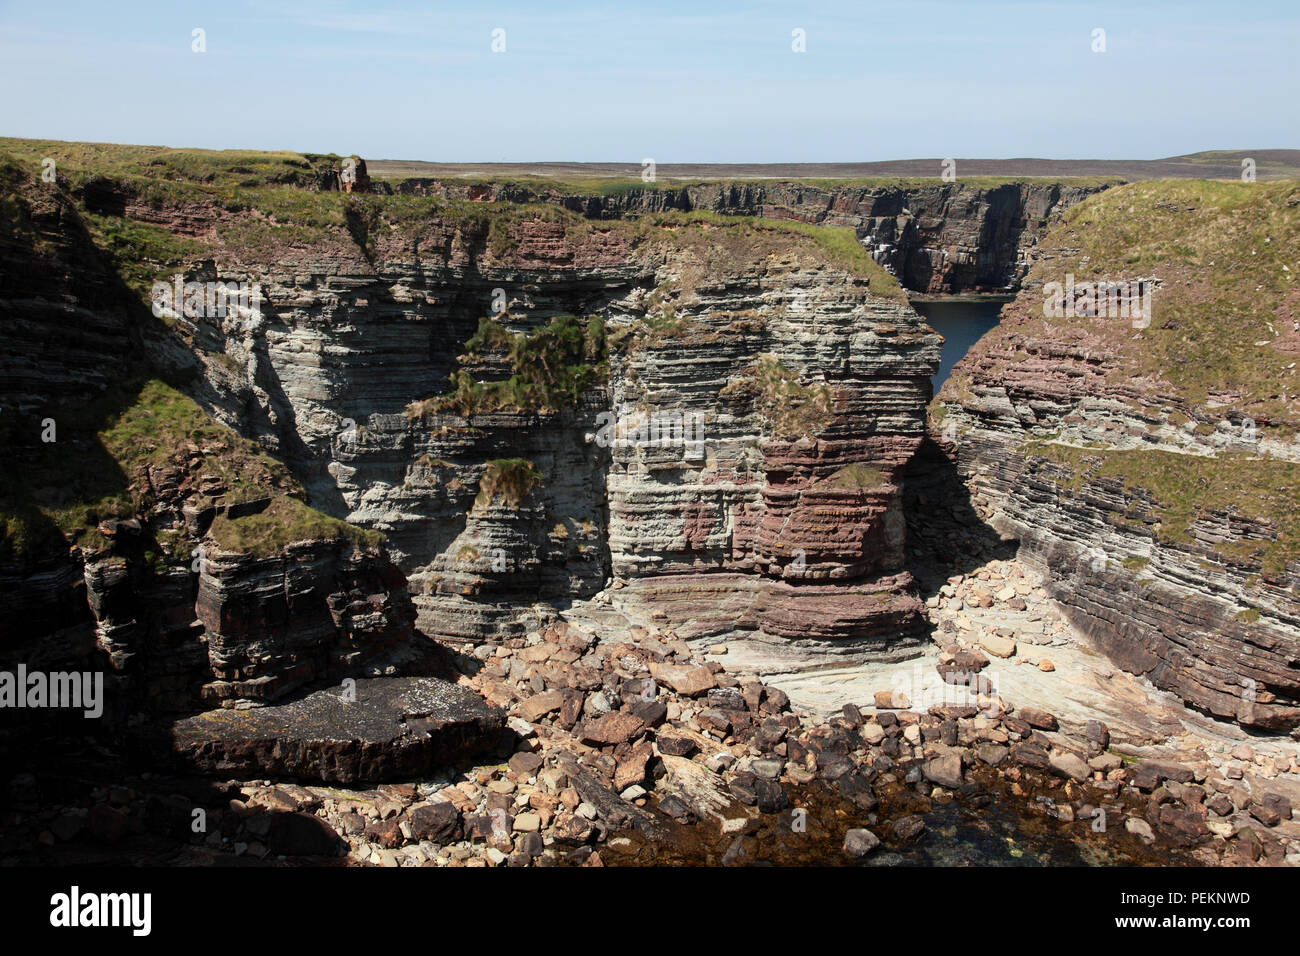 Geological strata from the Middle Devonian period in the rocks at Deerness, Orkney, Scotland Stock Photo